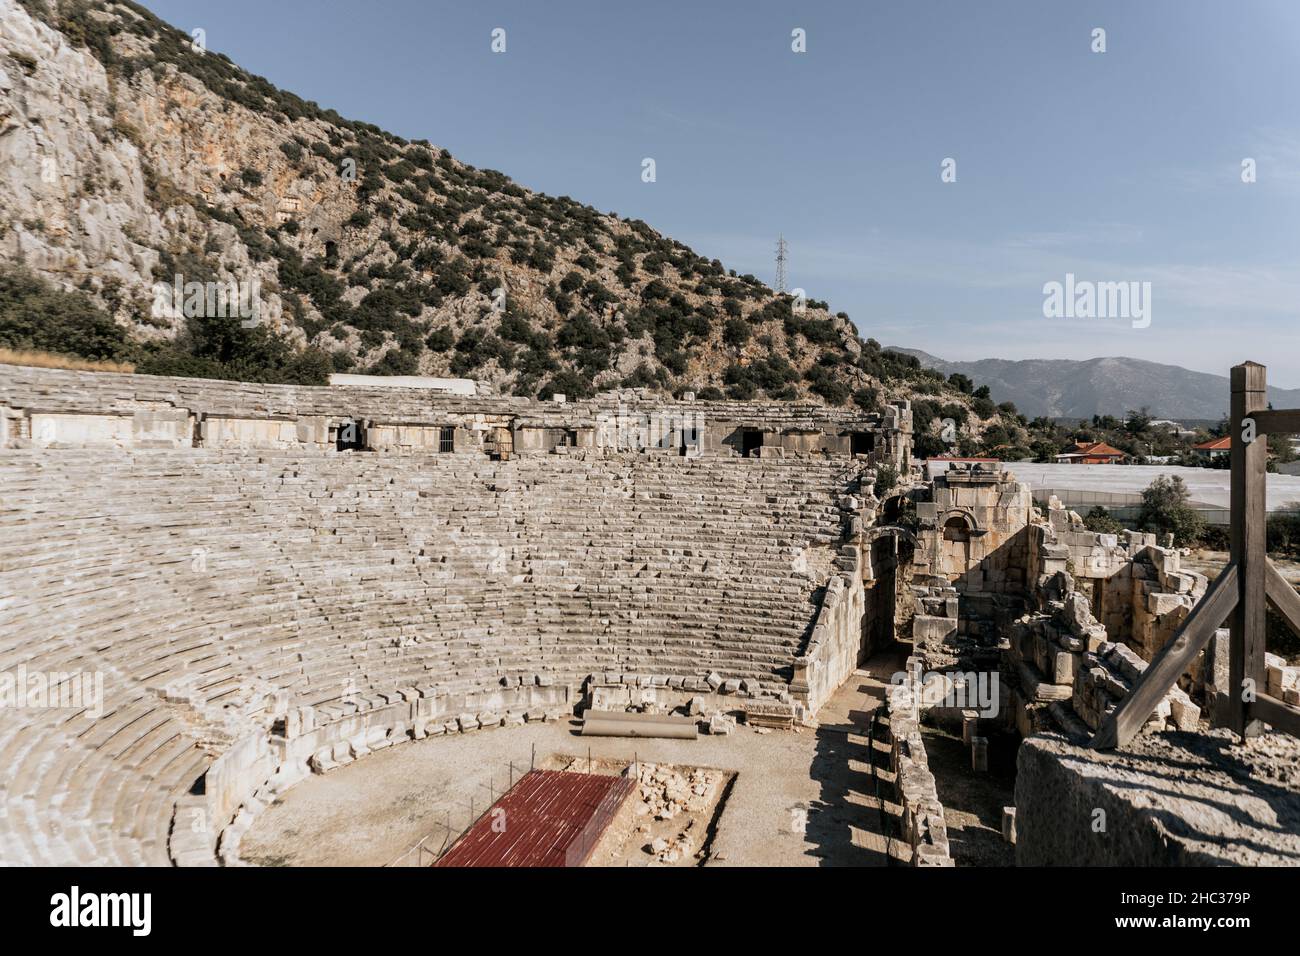 Ancient Greek theatre in Myra, Turkey. Amphitheater with the rock-cut tombs of the Lycian necropolis Stock Photo